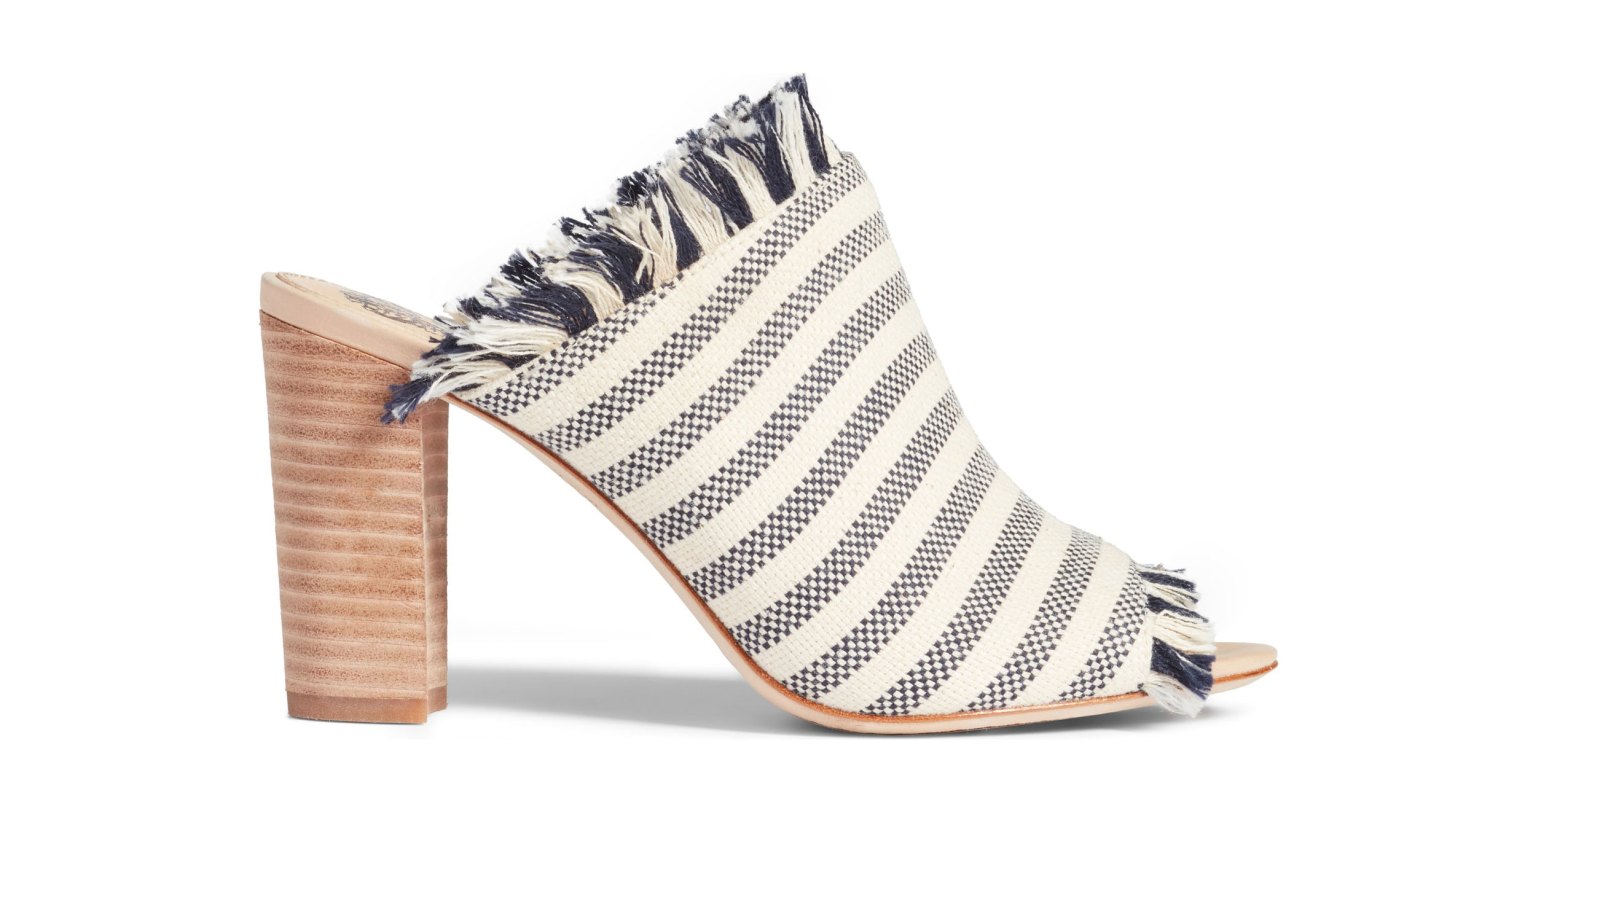 Vince Camuto mules